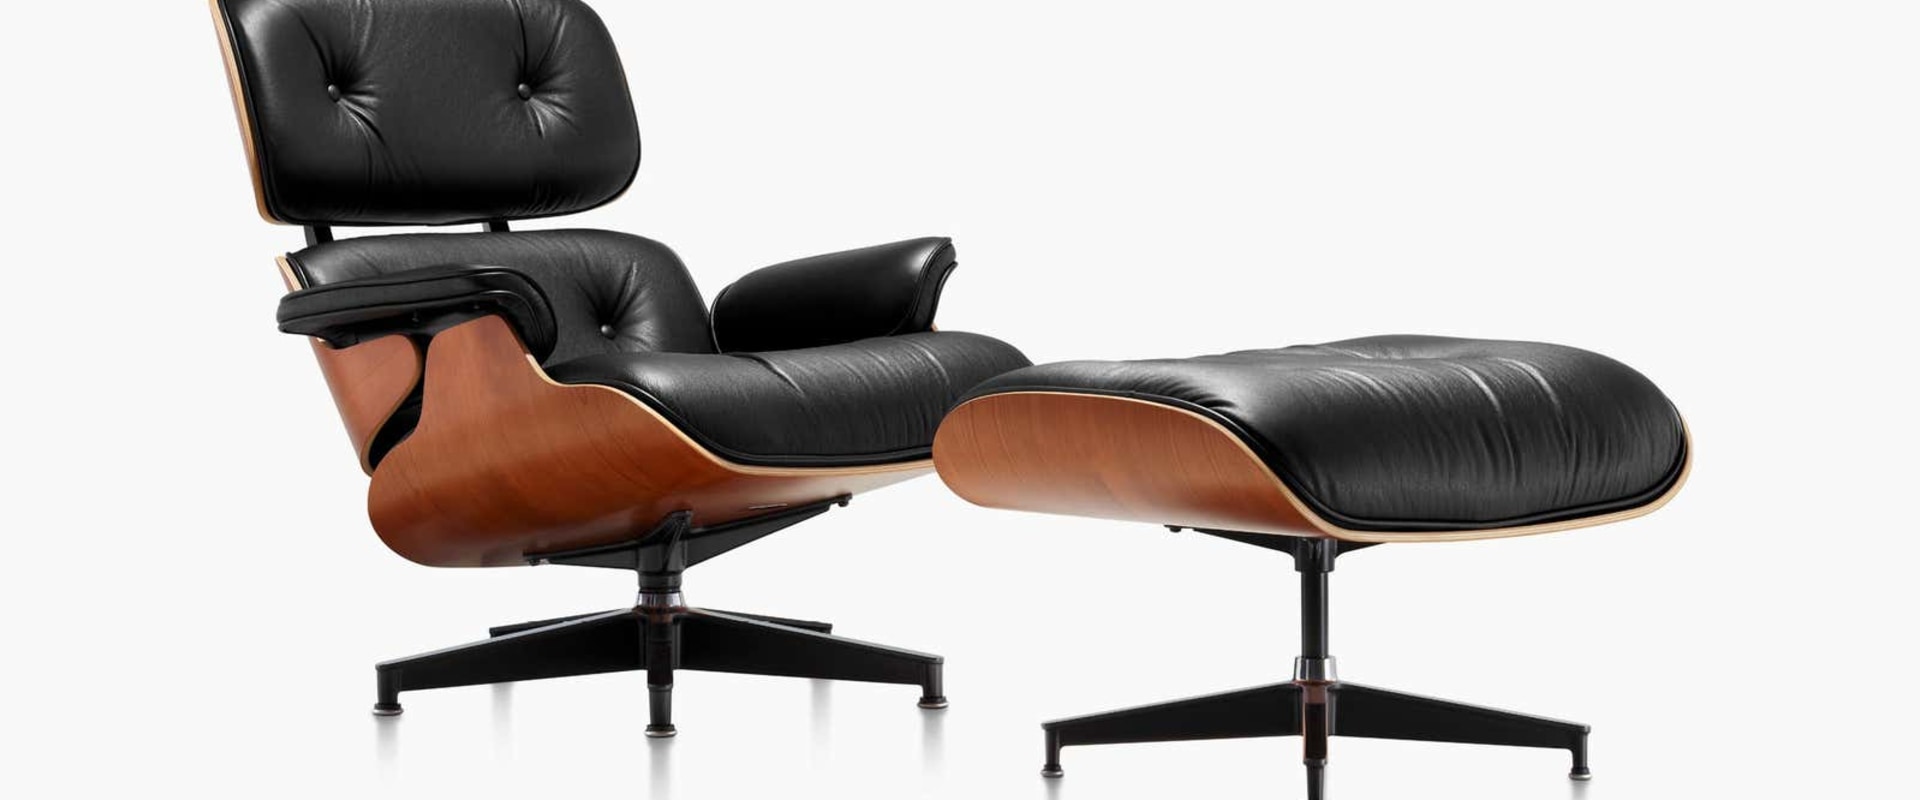 The Difference Between an Original Eames Office Chair and a Replica